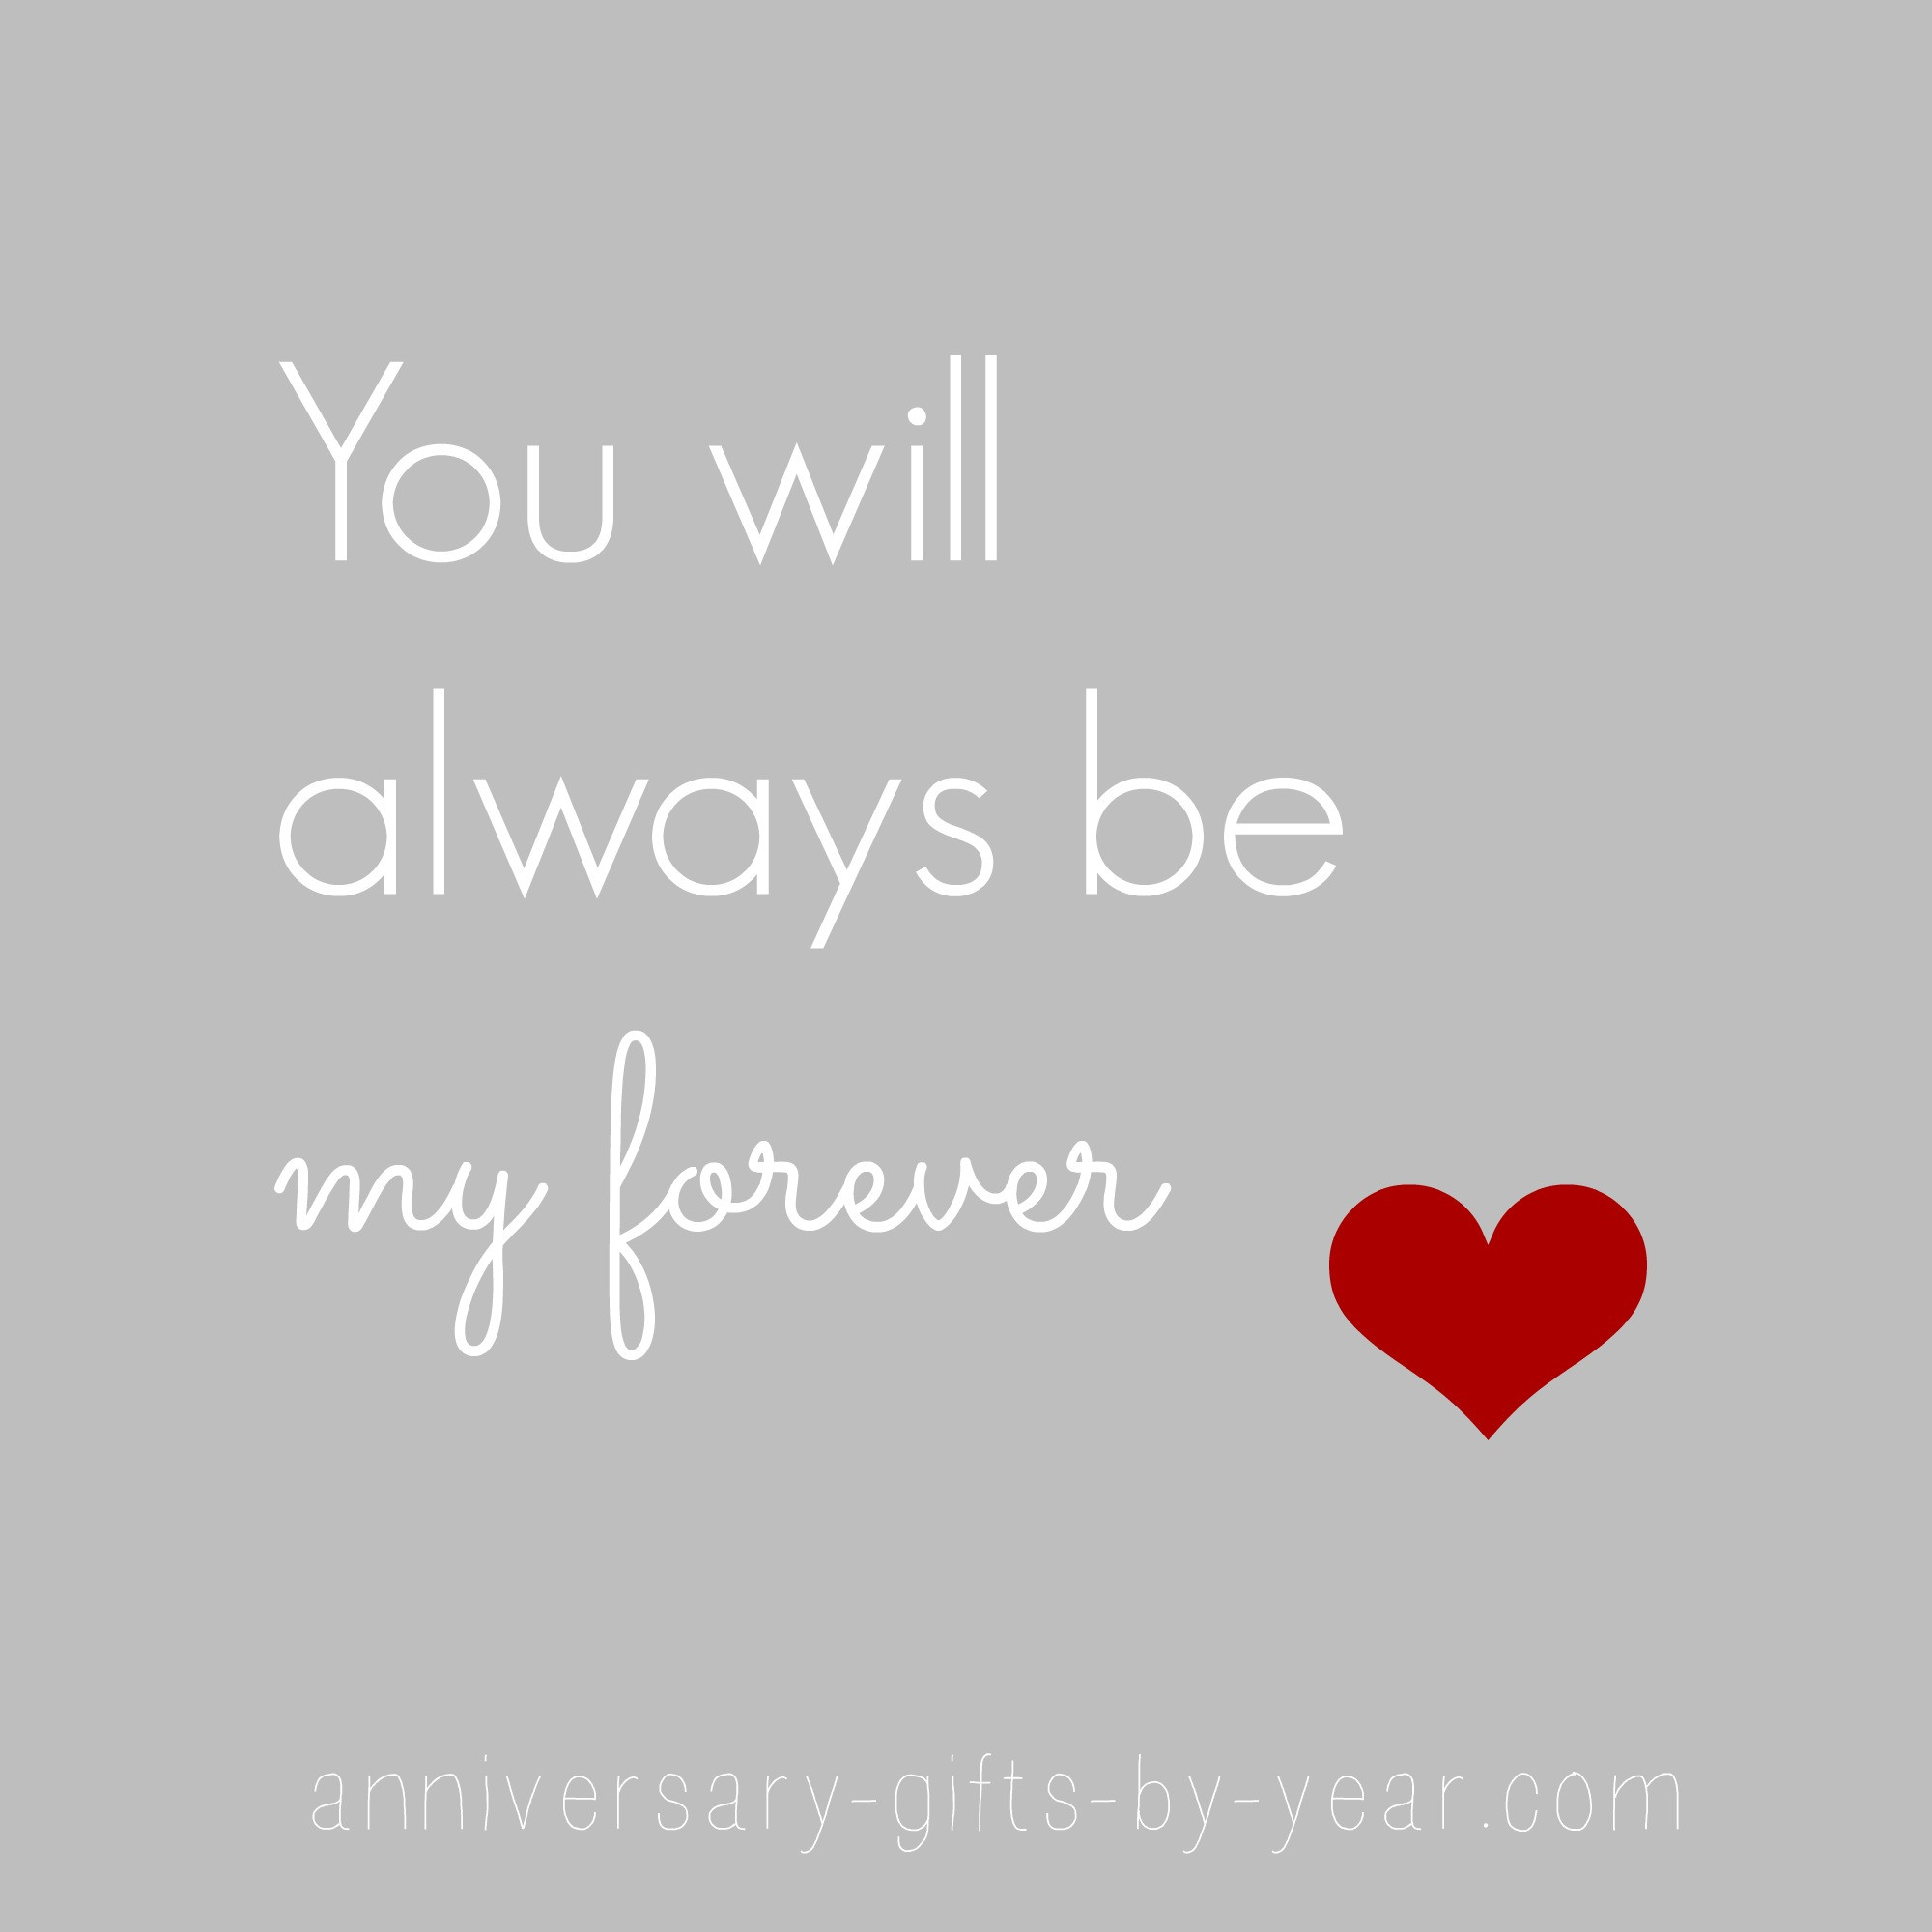 Quotes For Anniversary
 Anniversary Quotes Perfect For Anniversary Cards and